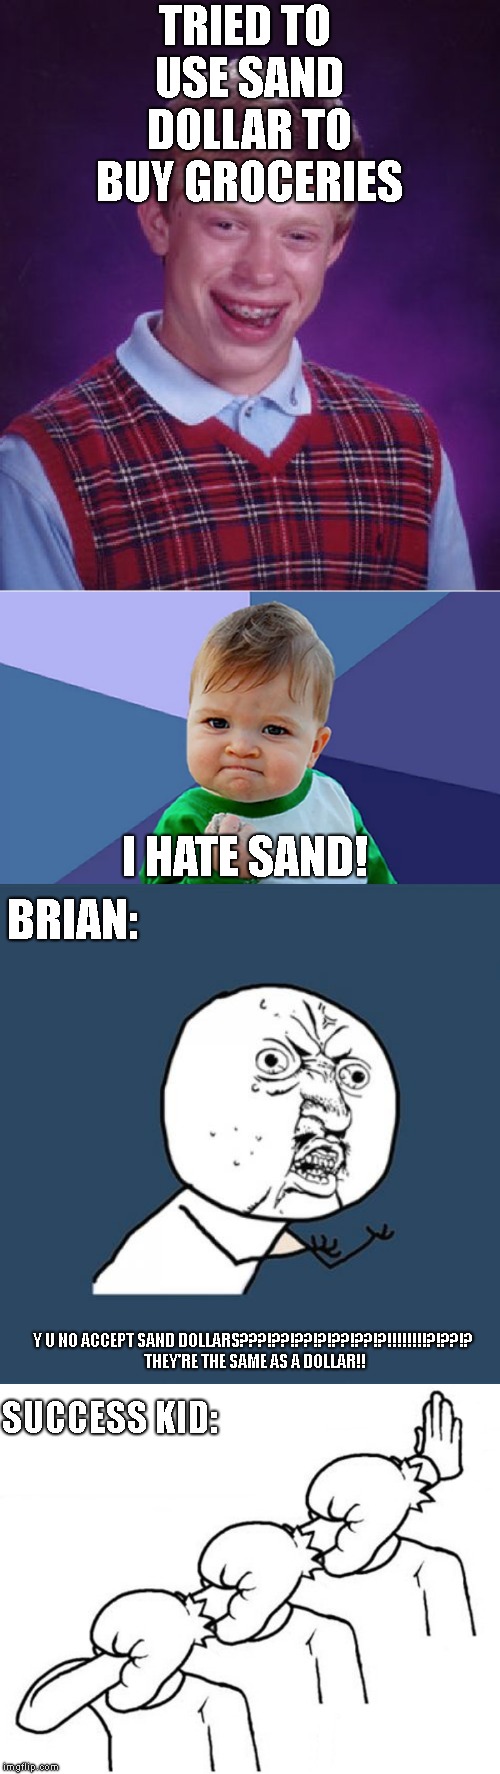 Brian cant catch a break | TRIED TO USE SAND DOLLAR TO BUY GROCERIES; I HATE SAND! BRIAN:; Y U NO ACCEPT SAND DOLLARS???!??!??!?!??!??!?!!!!!!!!?!??!? THEY'RE THE SAME AS A DOLLAR!! SUCCESS KID: | image tagged in y u no,bad luck brian,success kid,memes | made w/ Imgflip meme maker